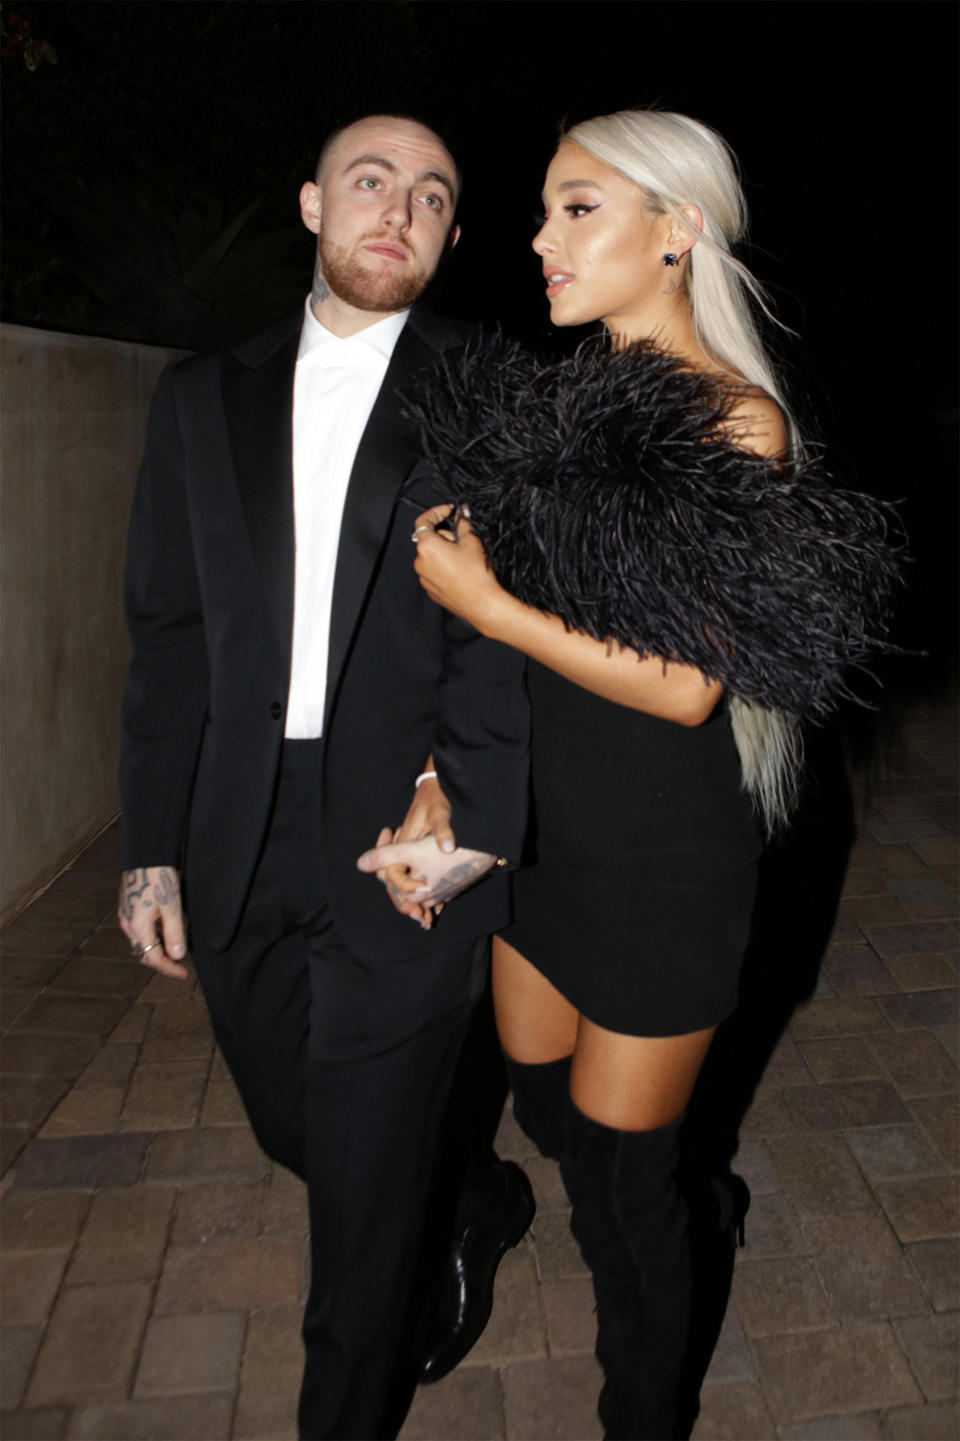 Mac Miller and Ariana Grande stepped out on Oscars night in March to attend Madonna's after-party. (Photo: GC Images via Getty Images)